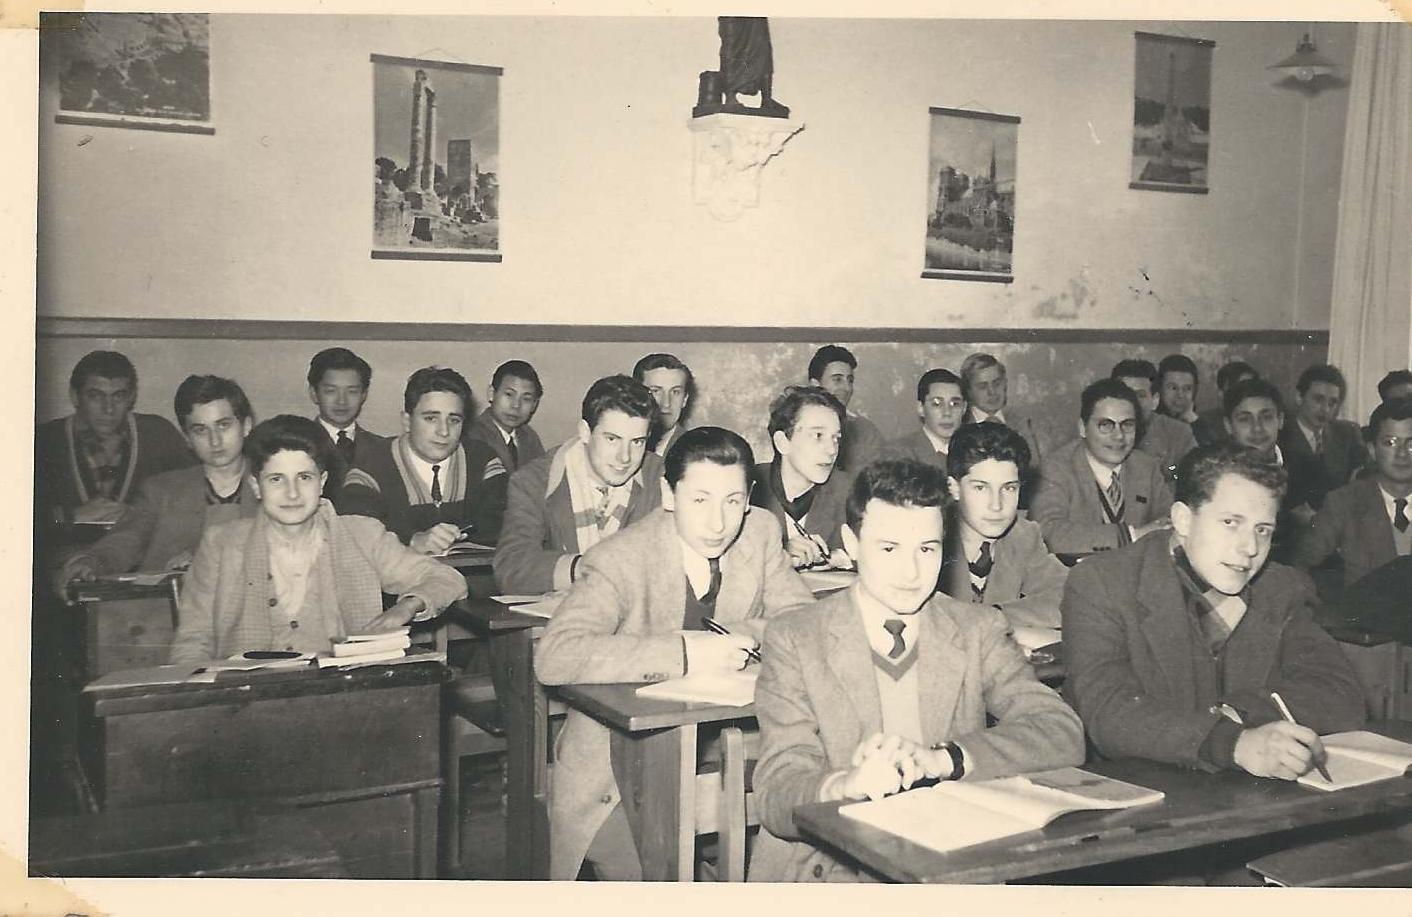  PHOTO 1953 to 1954 class of Camille Anselme at Villa St. Jean Fribourg Suisse 